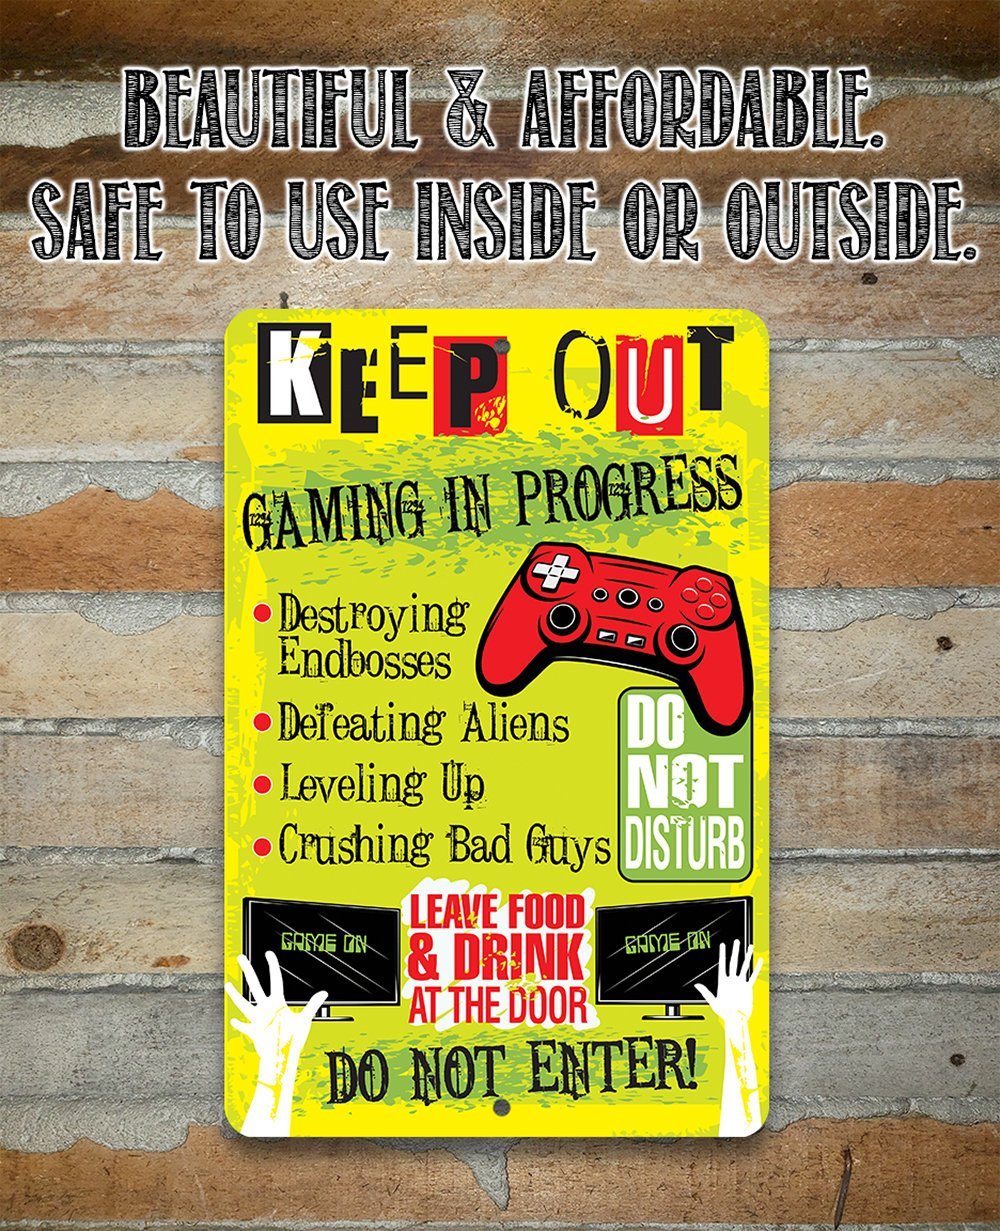 Keep Out Gamer - Metal Sign | Lone Star Art.